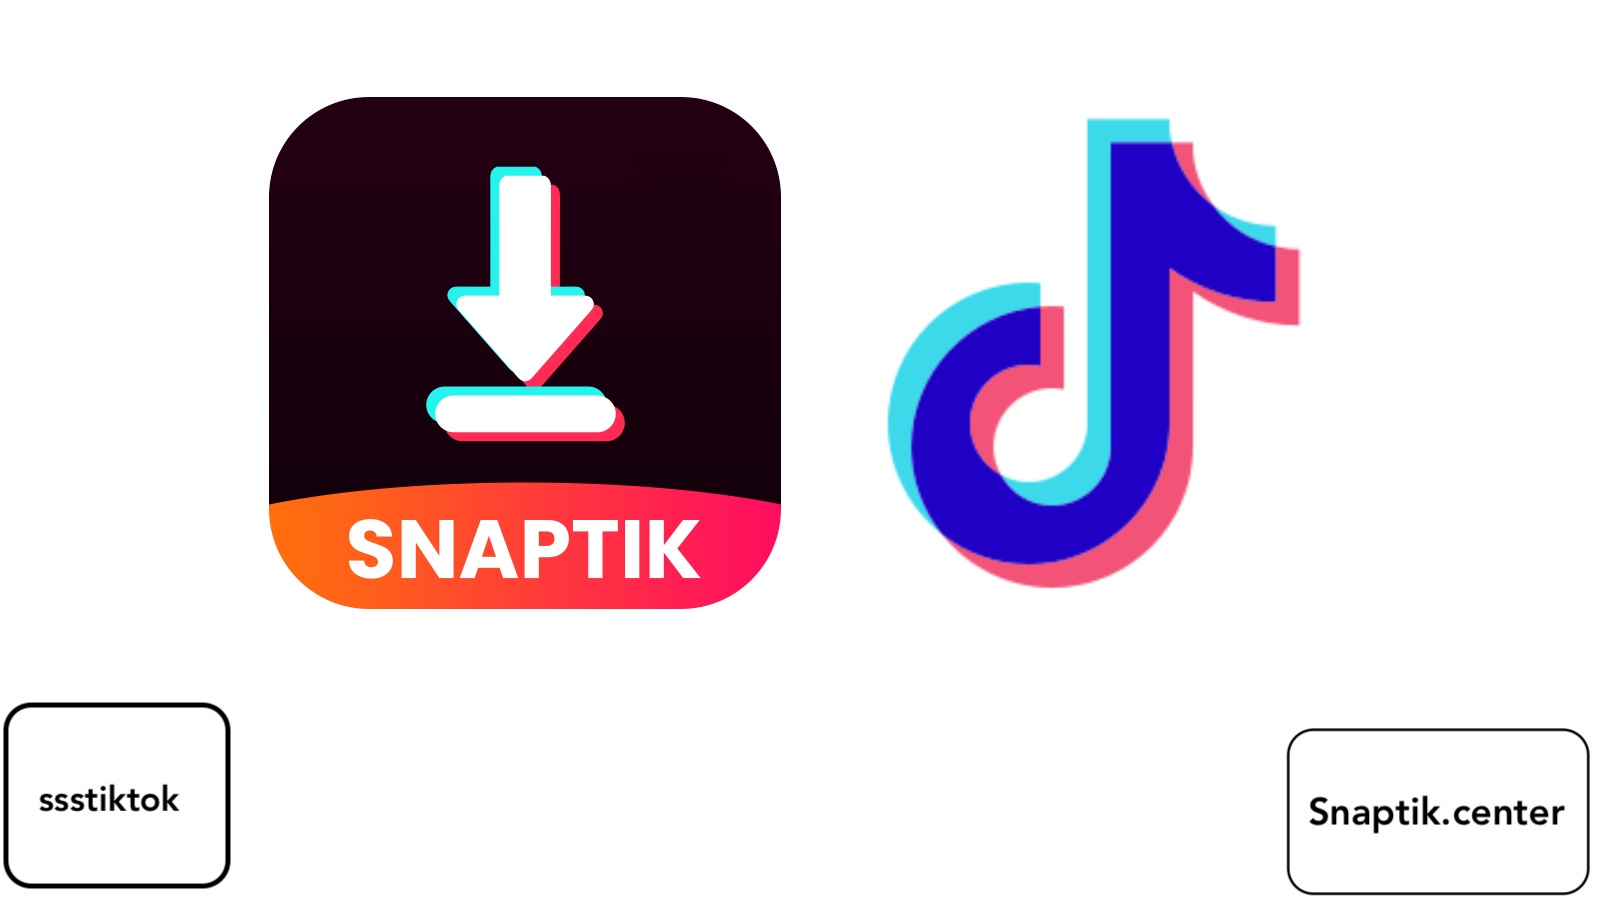 Snaptik and Ssstiktok - Champions of Creativity and Self-Expression